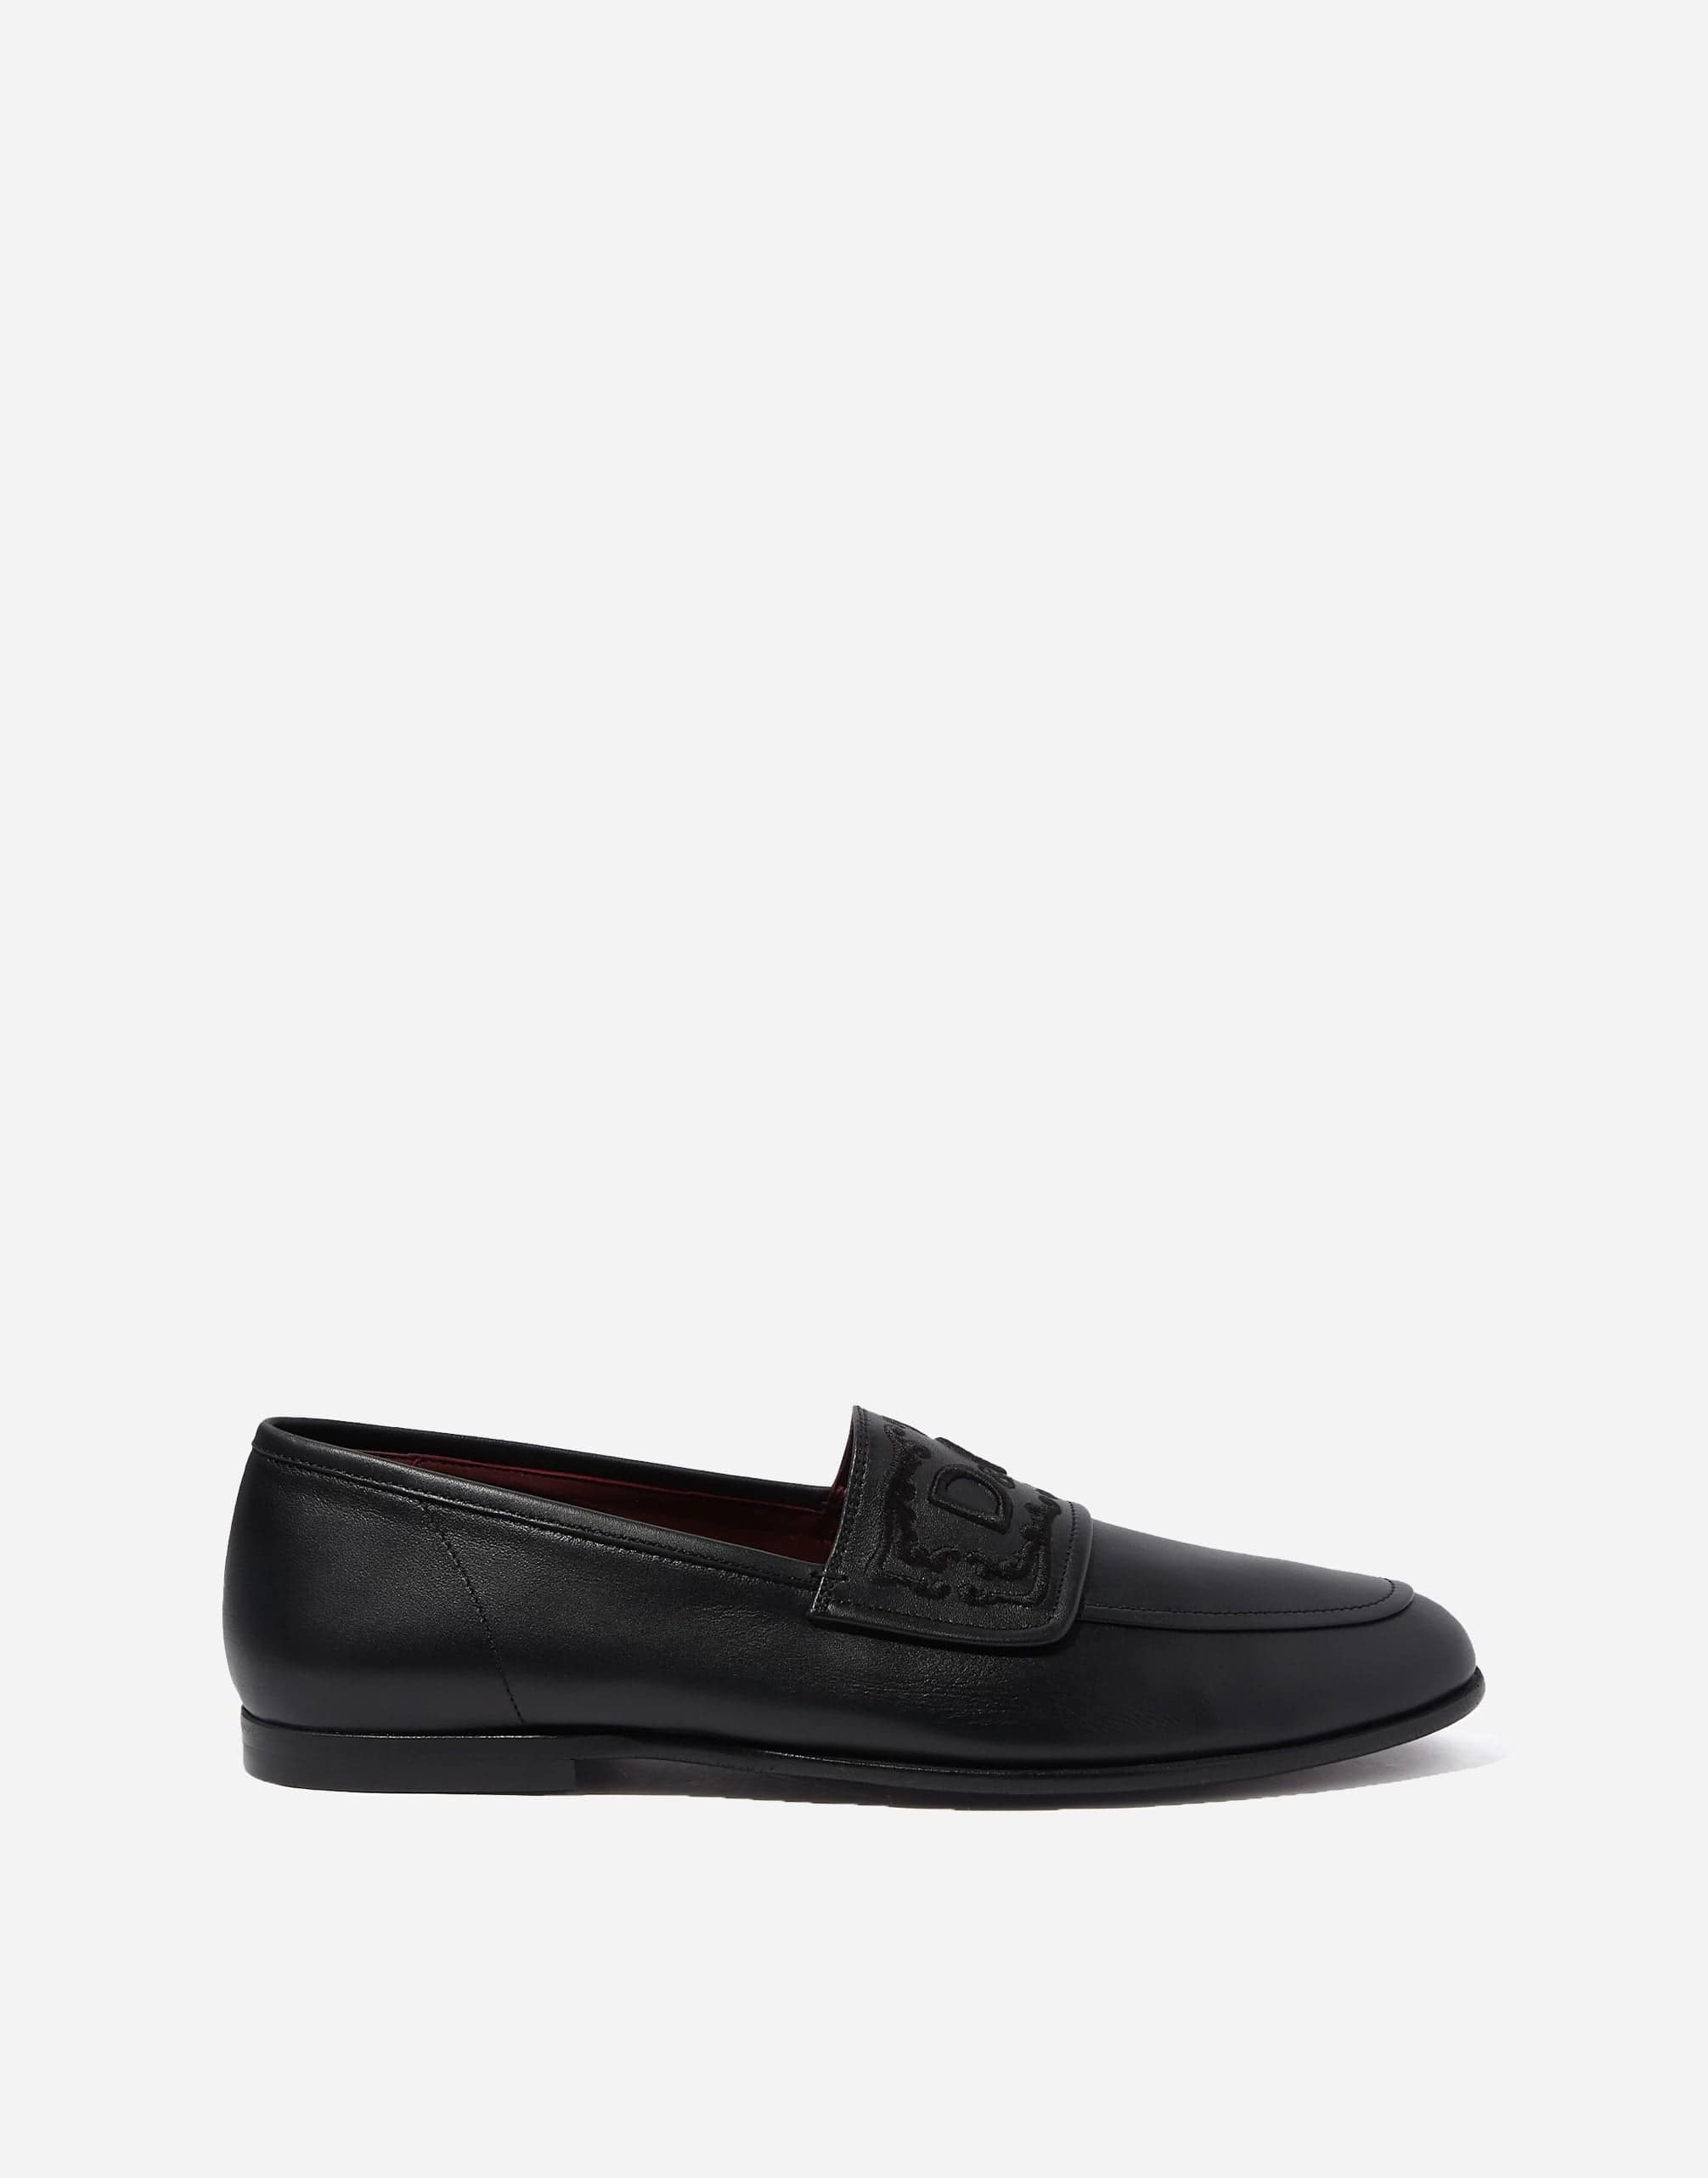 Dolce & Gabbana King City Leather Loafers